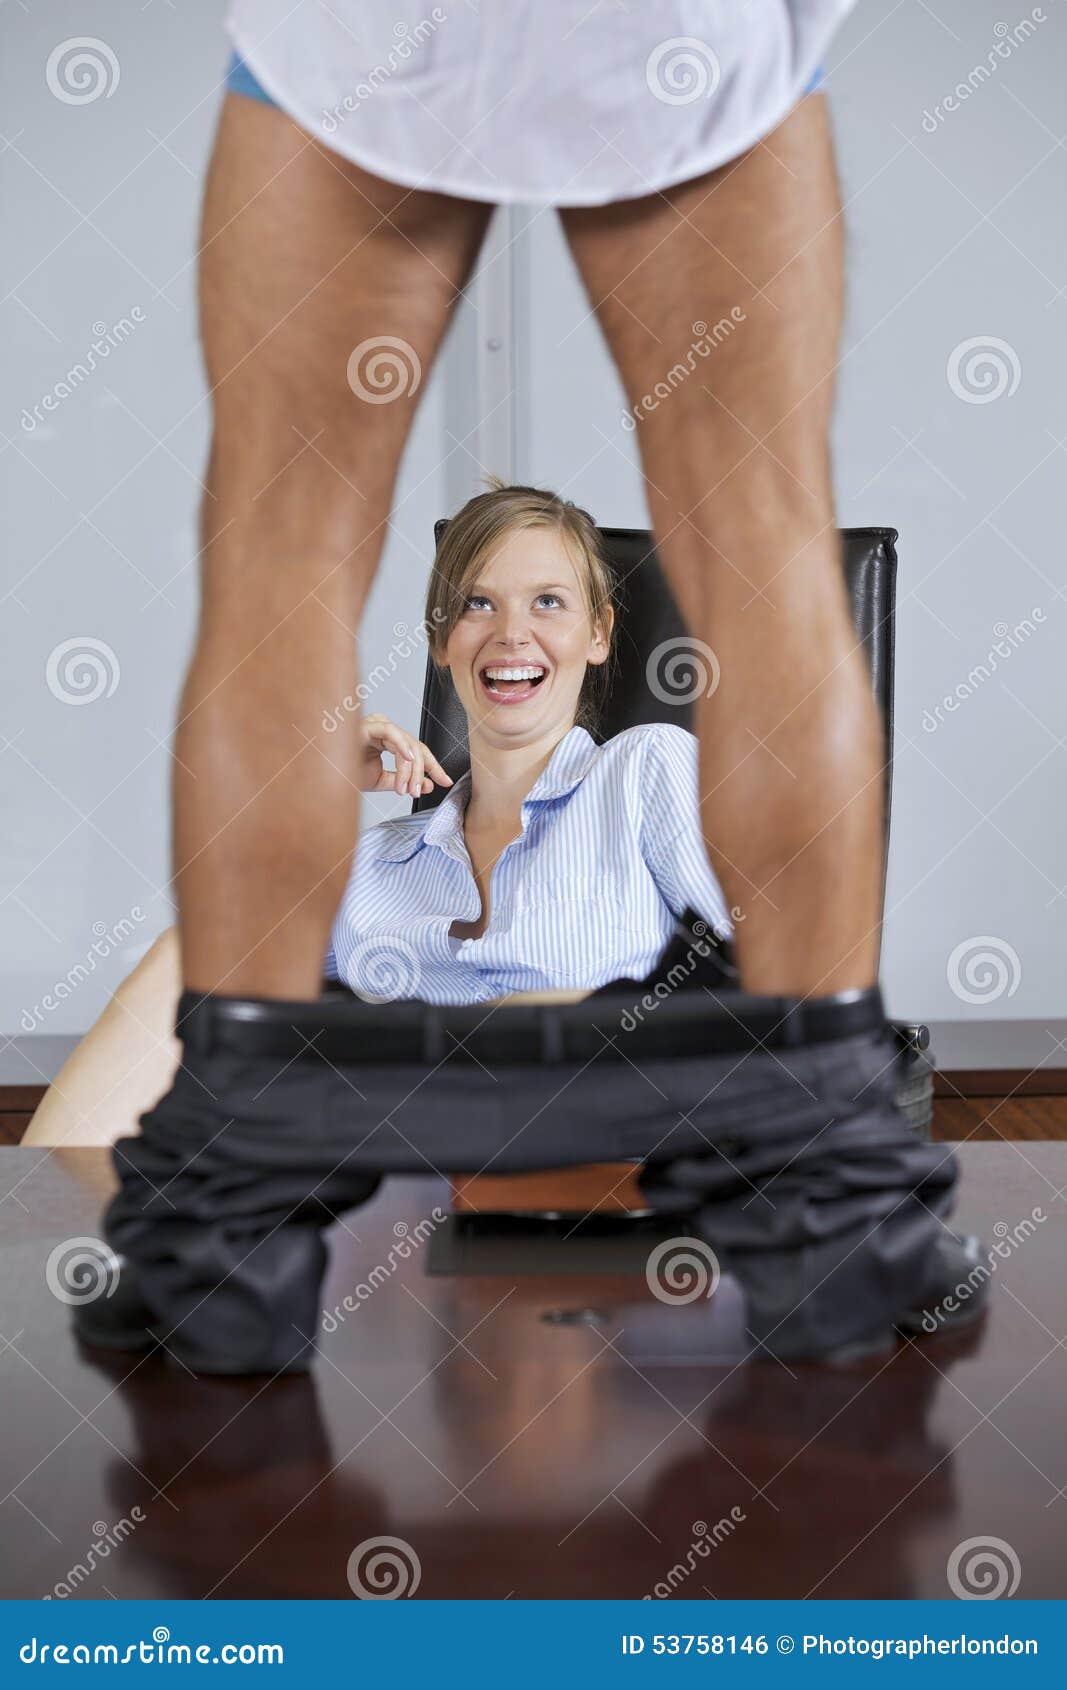 man standing on table with trouser down, flirting with businesswoman in office